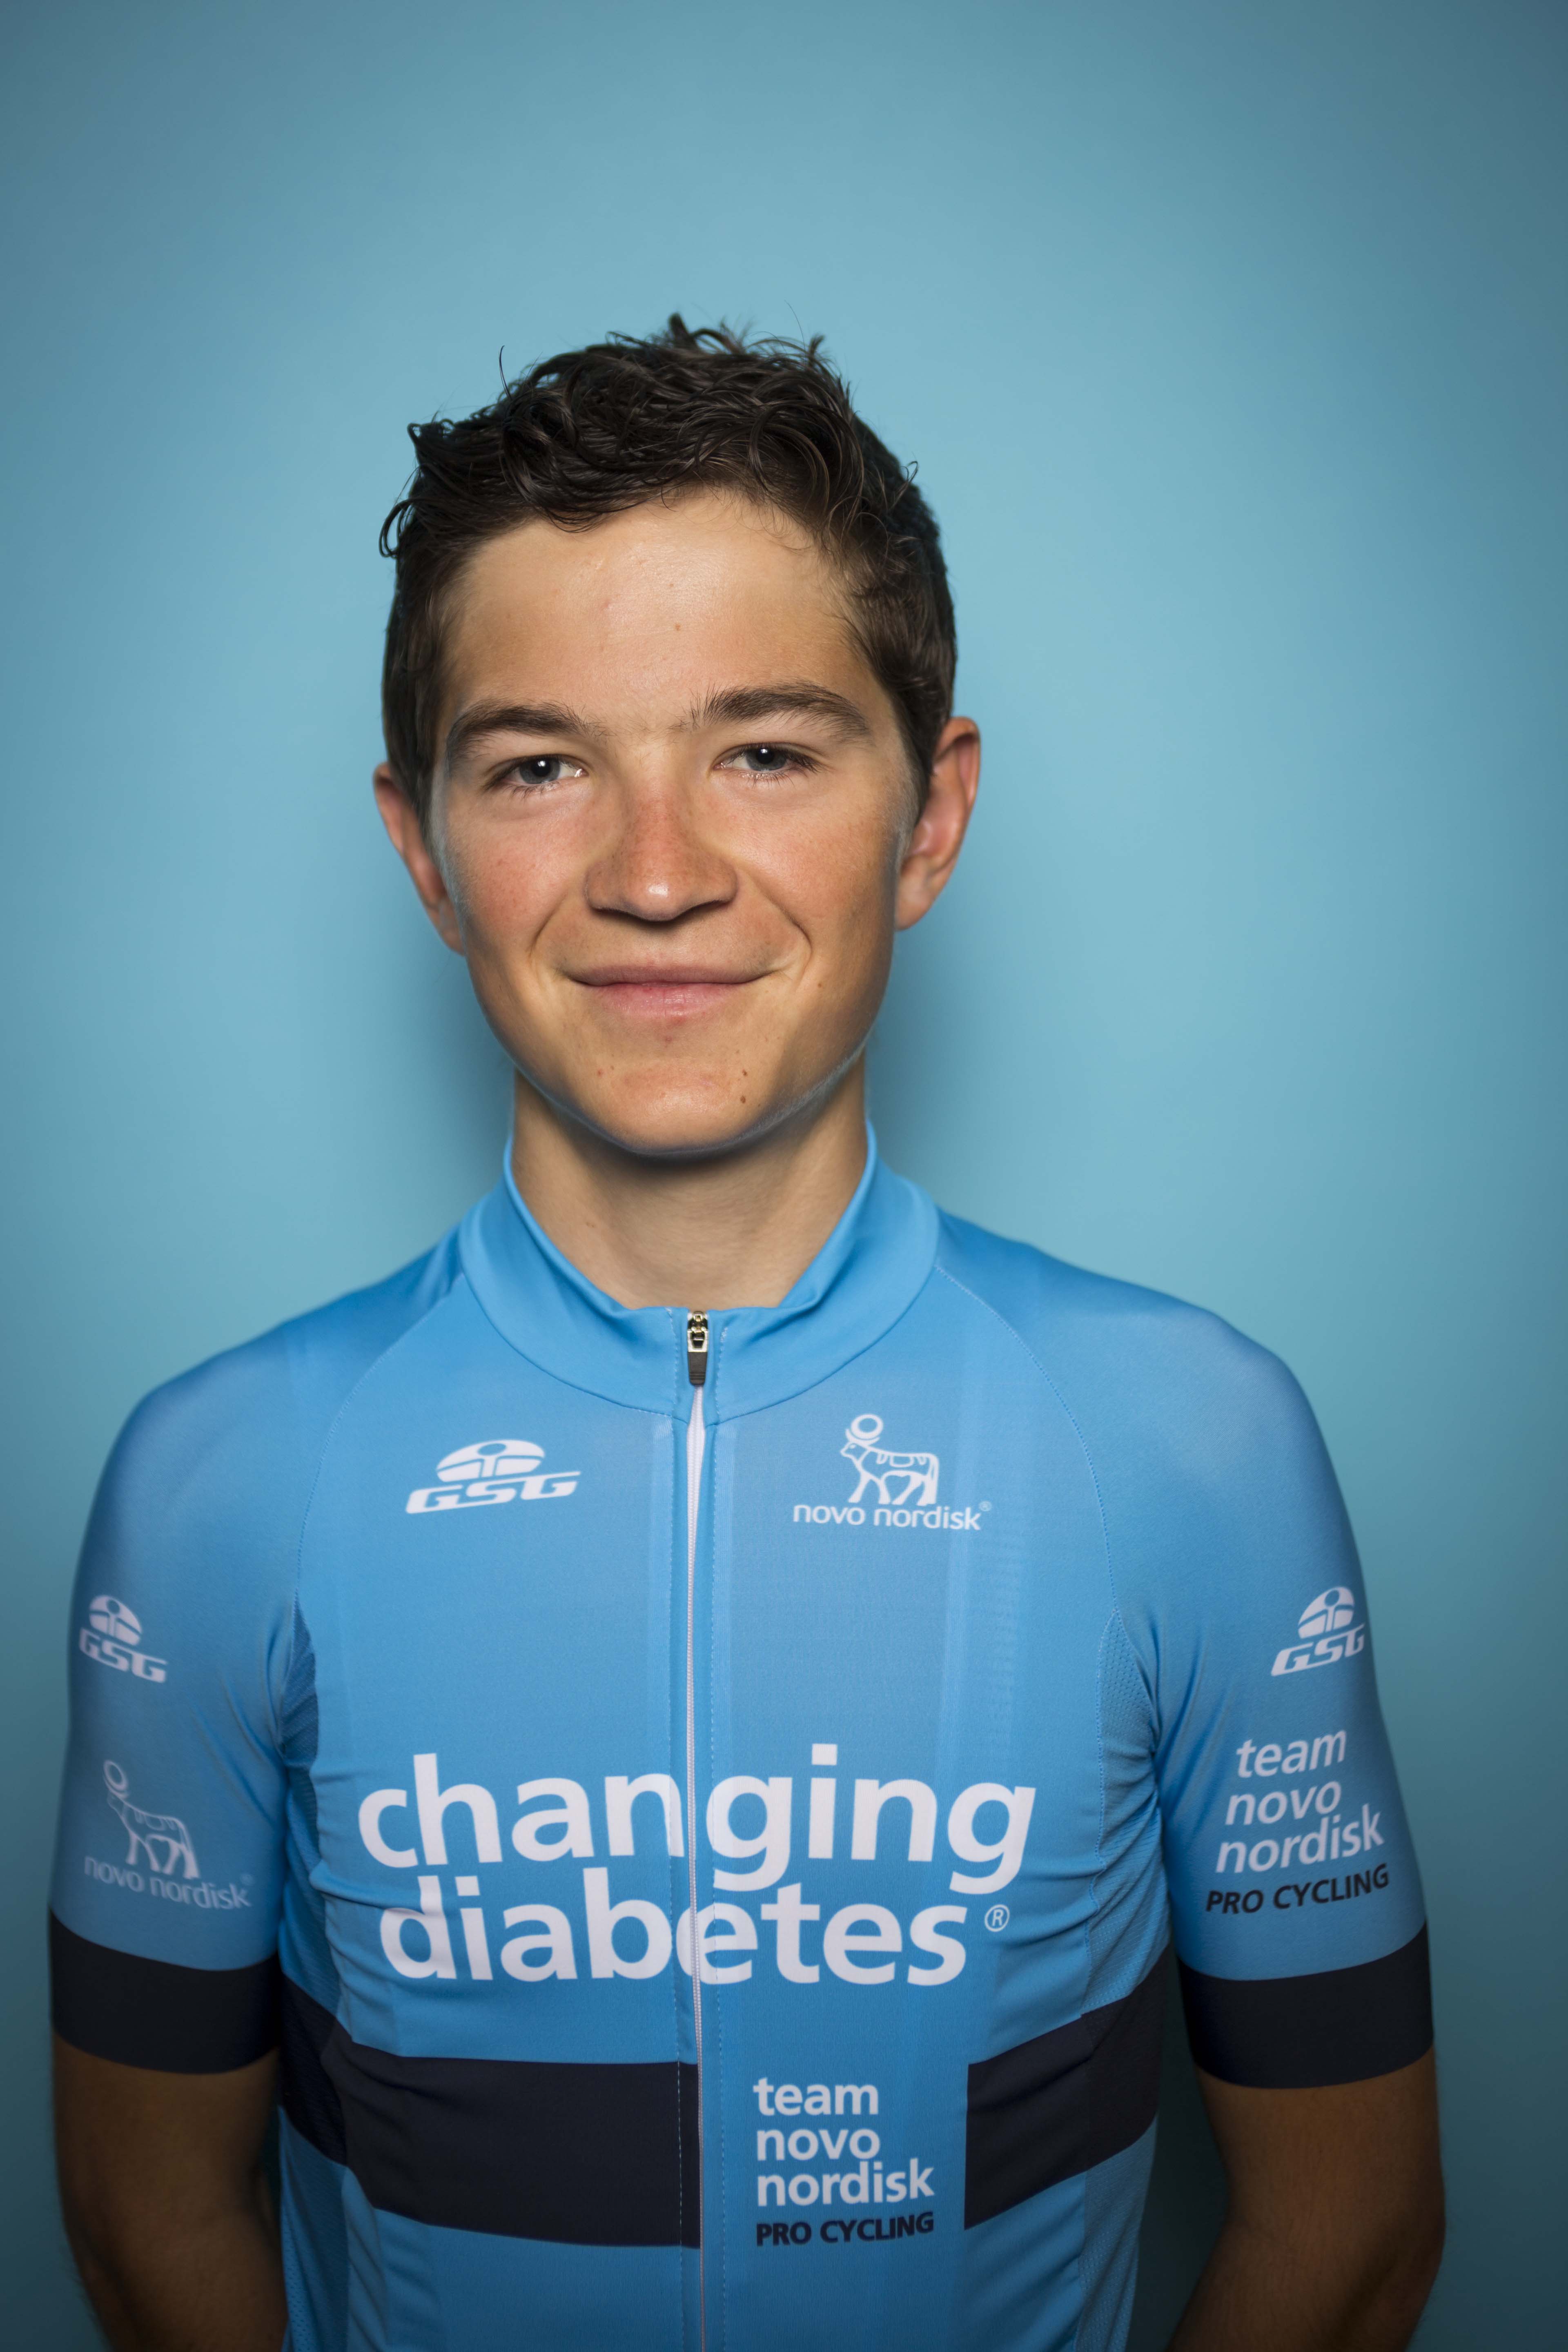 Australian Sam Munday began racing at 15, four years after he was diagnosed with type 1 diabetes